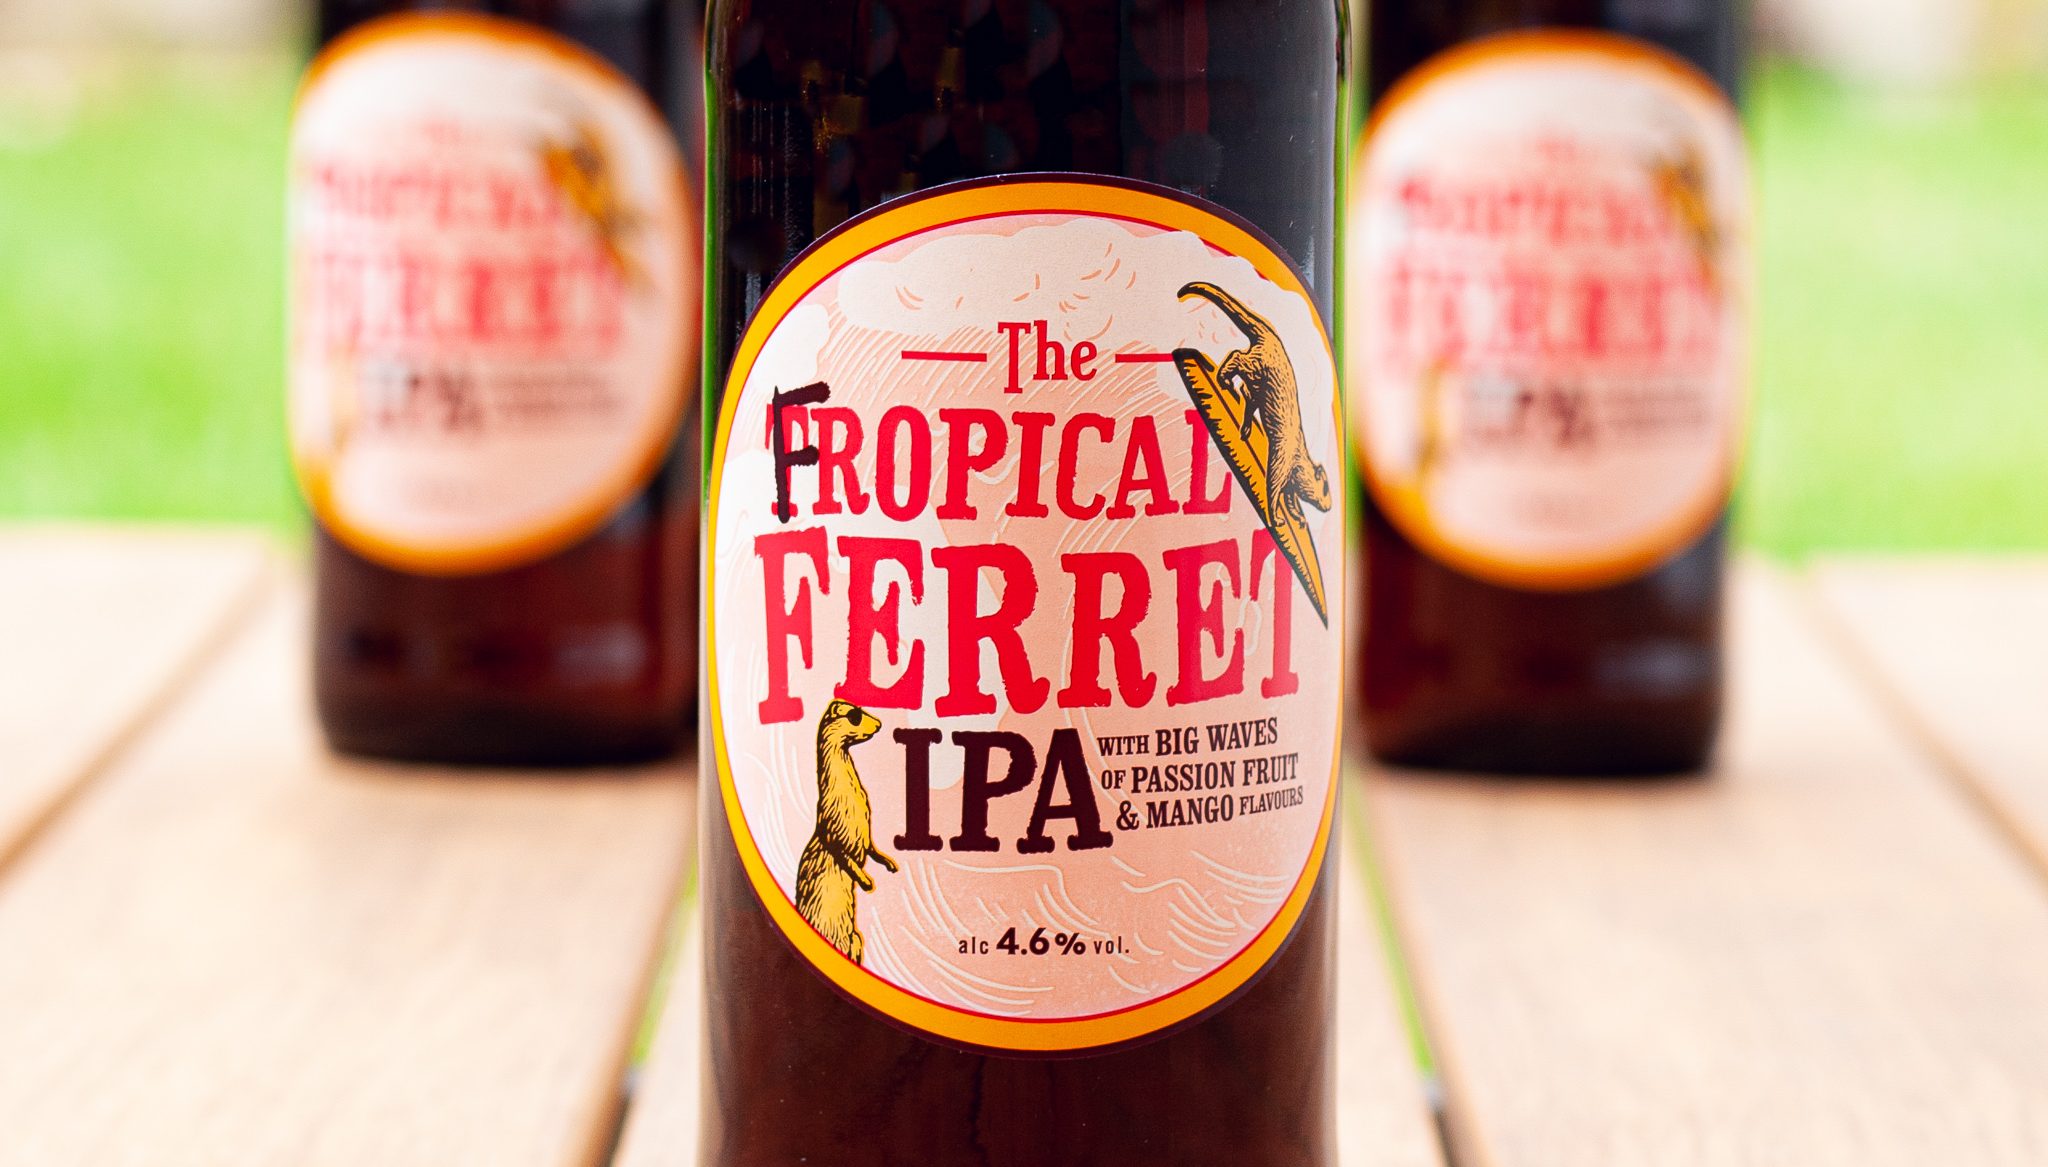 The new Fropical Ferret by Badger Beers